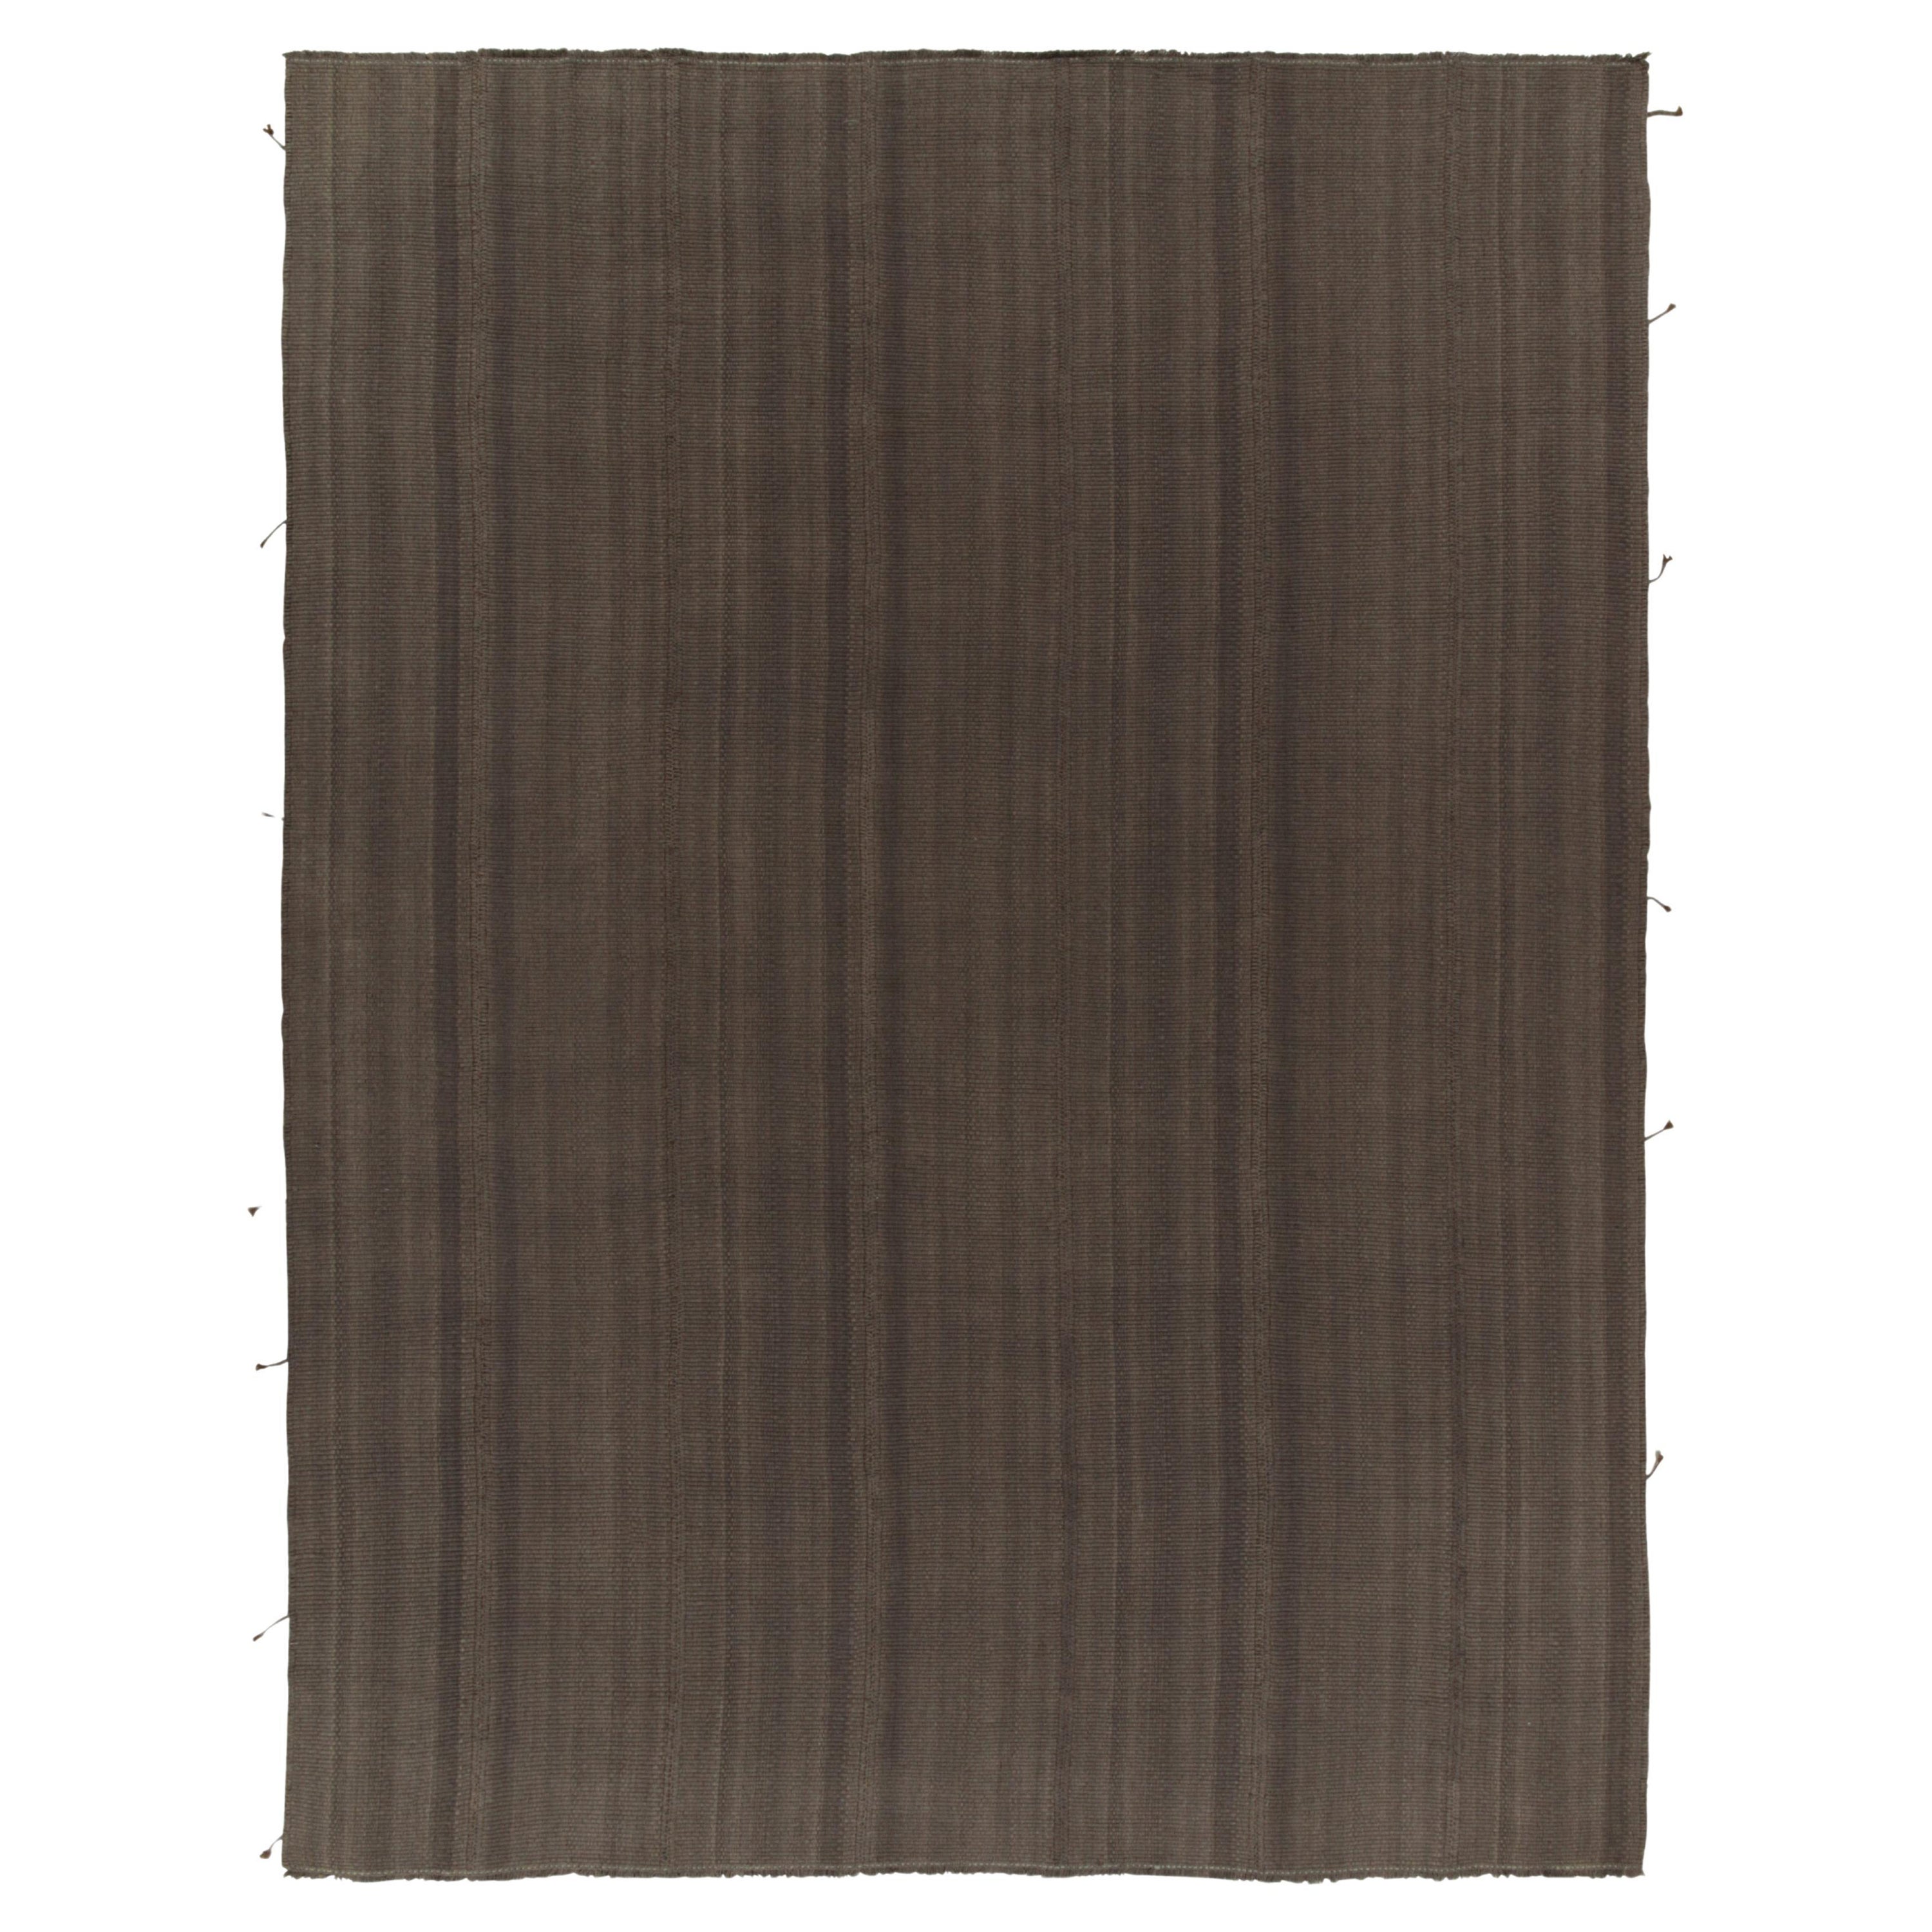 Rug & Kilim’s Contemporary Kilims in Muted Brown Stripes, Panel Woven style